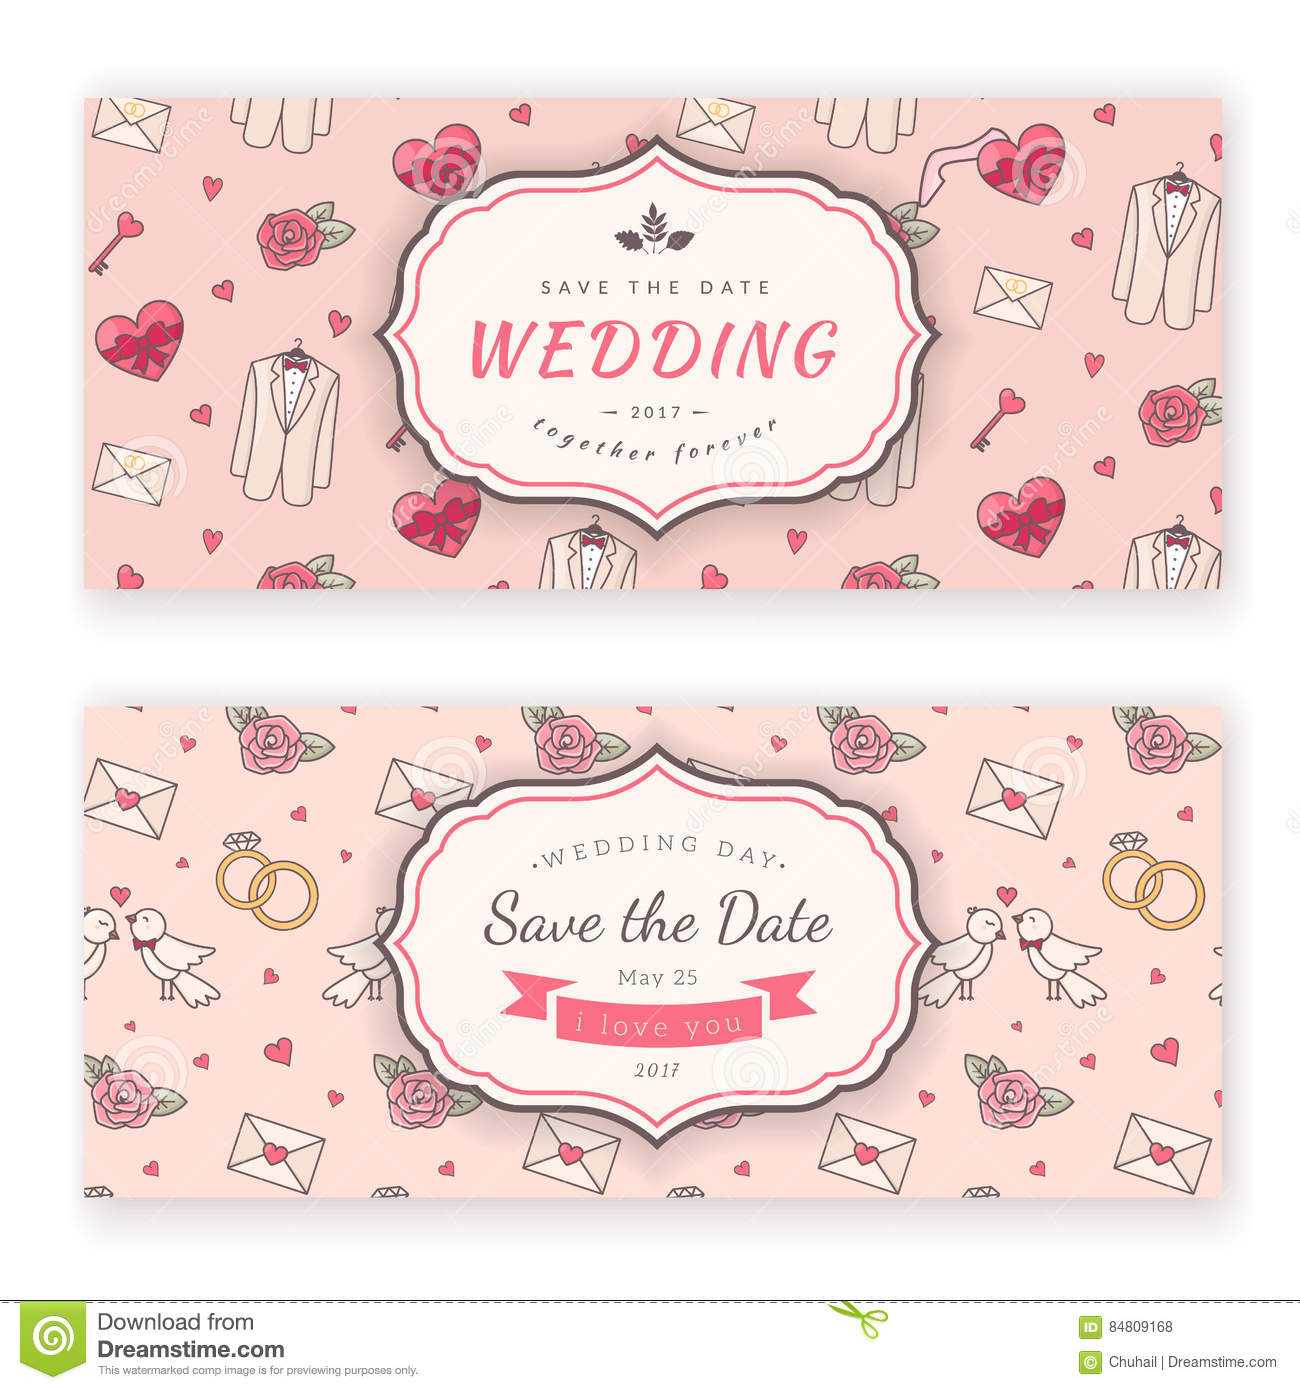 Wedding Banner Template. Stock Vector. Illustration Of Pertaining To Wedding Banner Design Templates